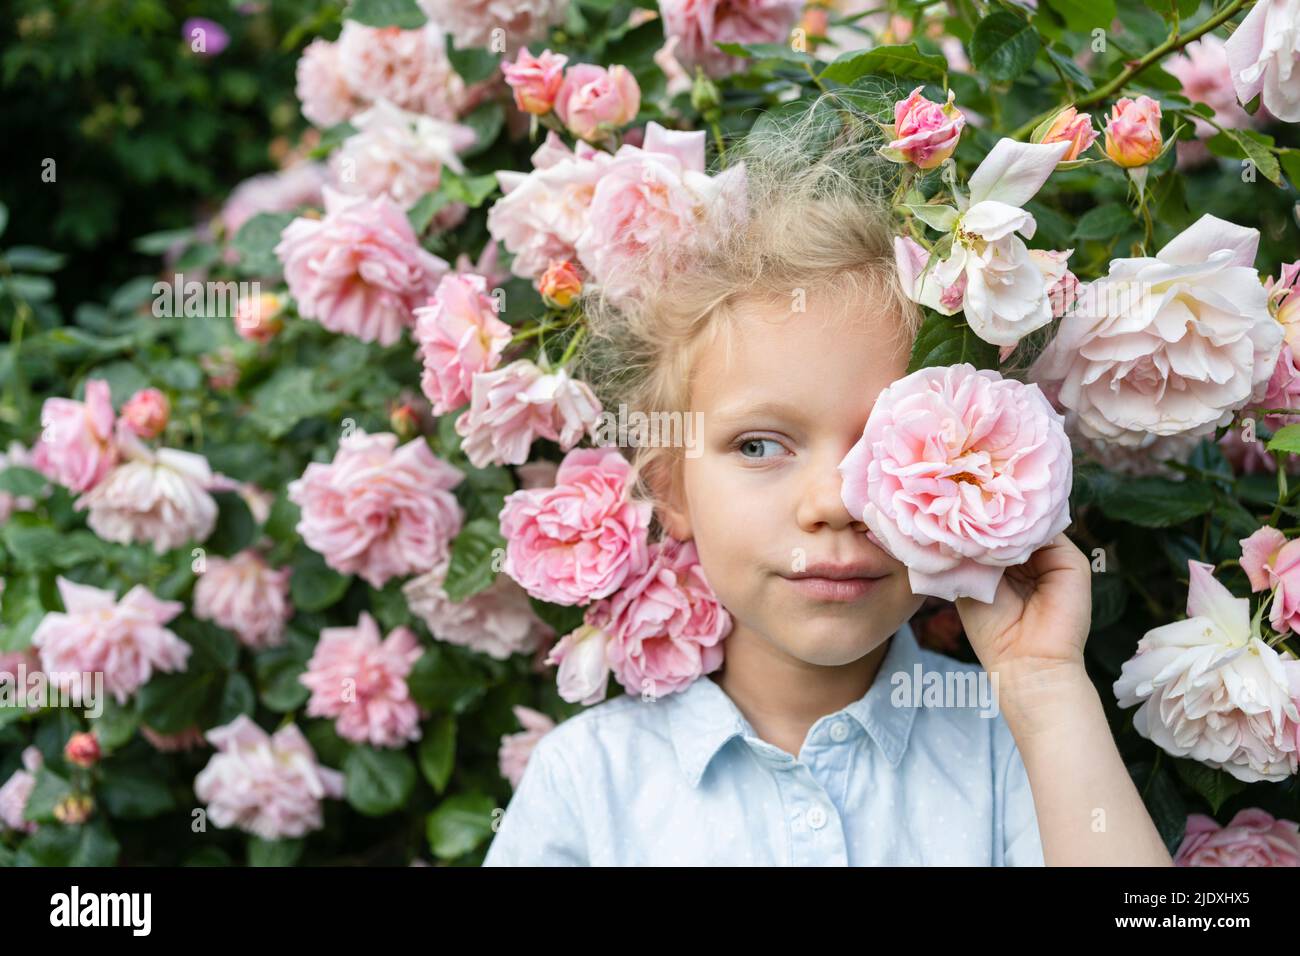 Cute girl holding pink rose in front of eye at rose garden Stock Photo